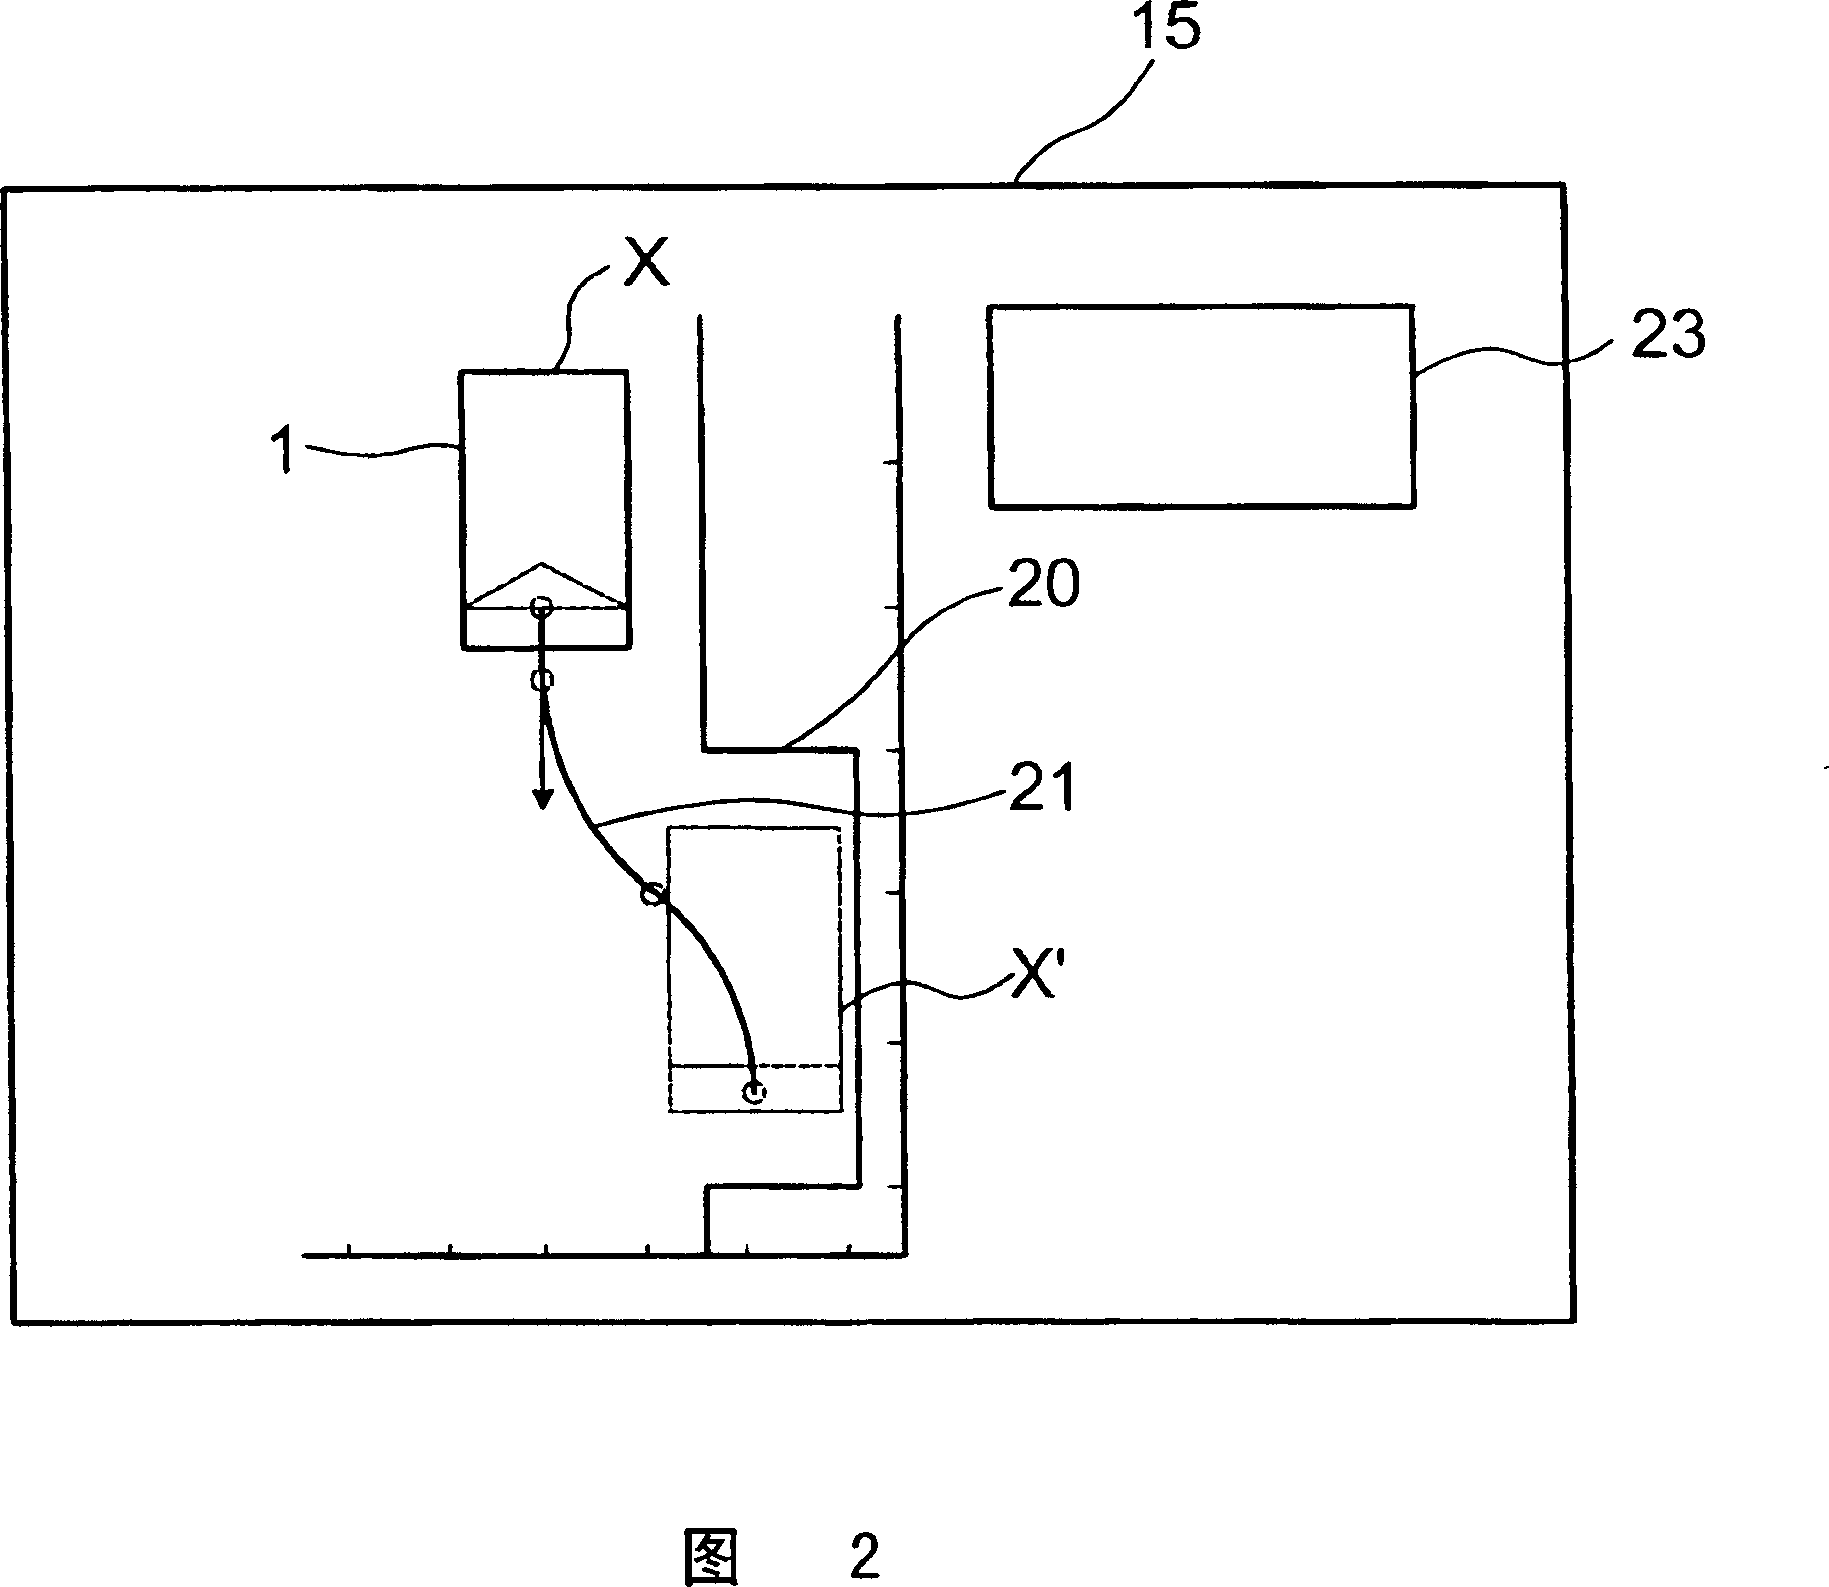 Method and device for assisting the parking of a motor vehicle